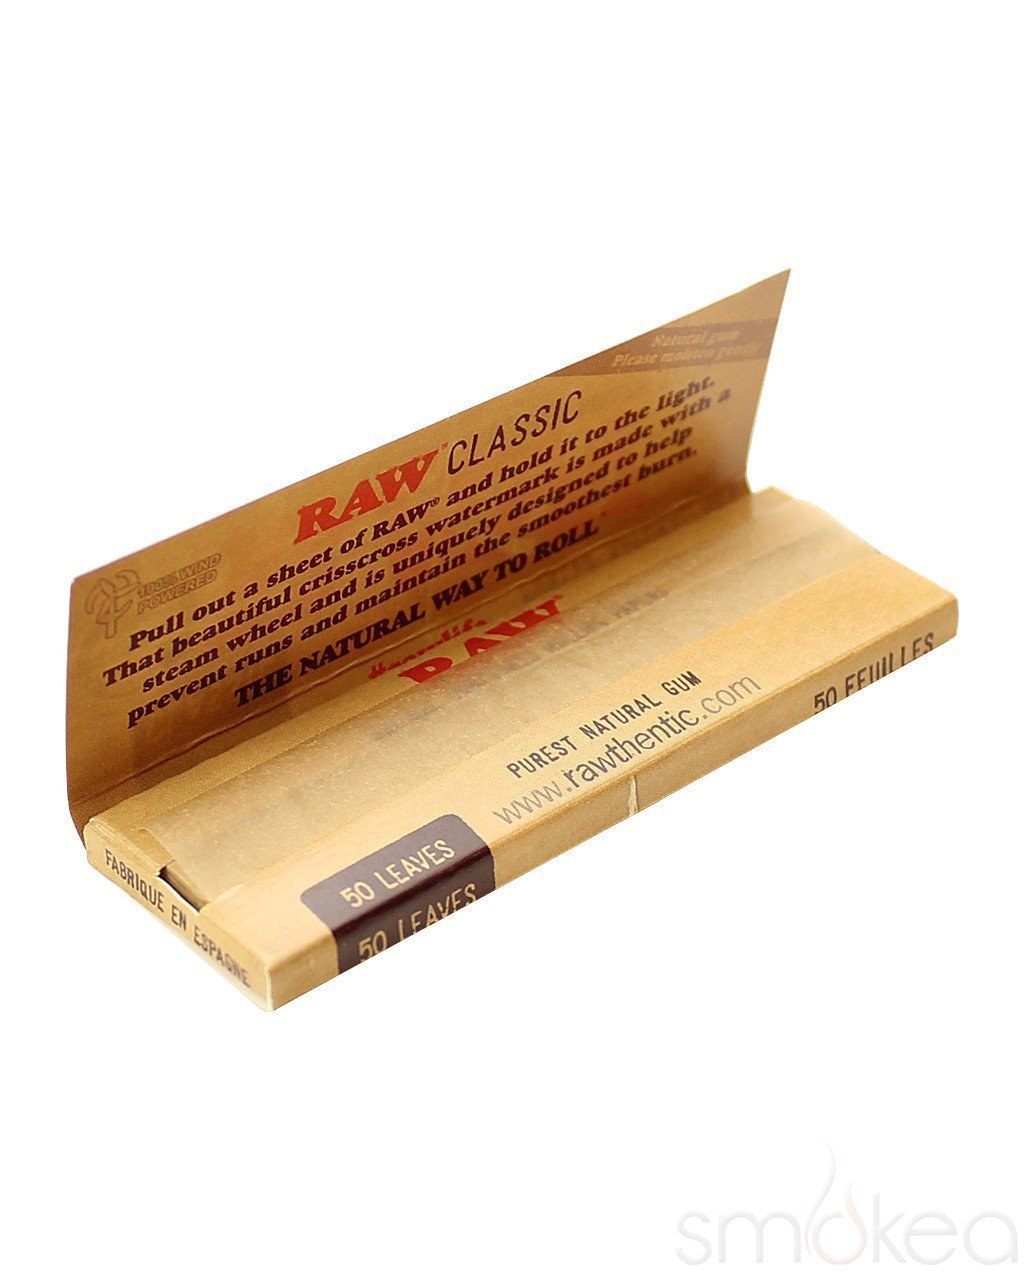 Raw Classic 1 1/4 Size Brown Rolling Paper (1 Booklet) - Bittchaser Smoke Shop